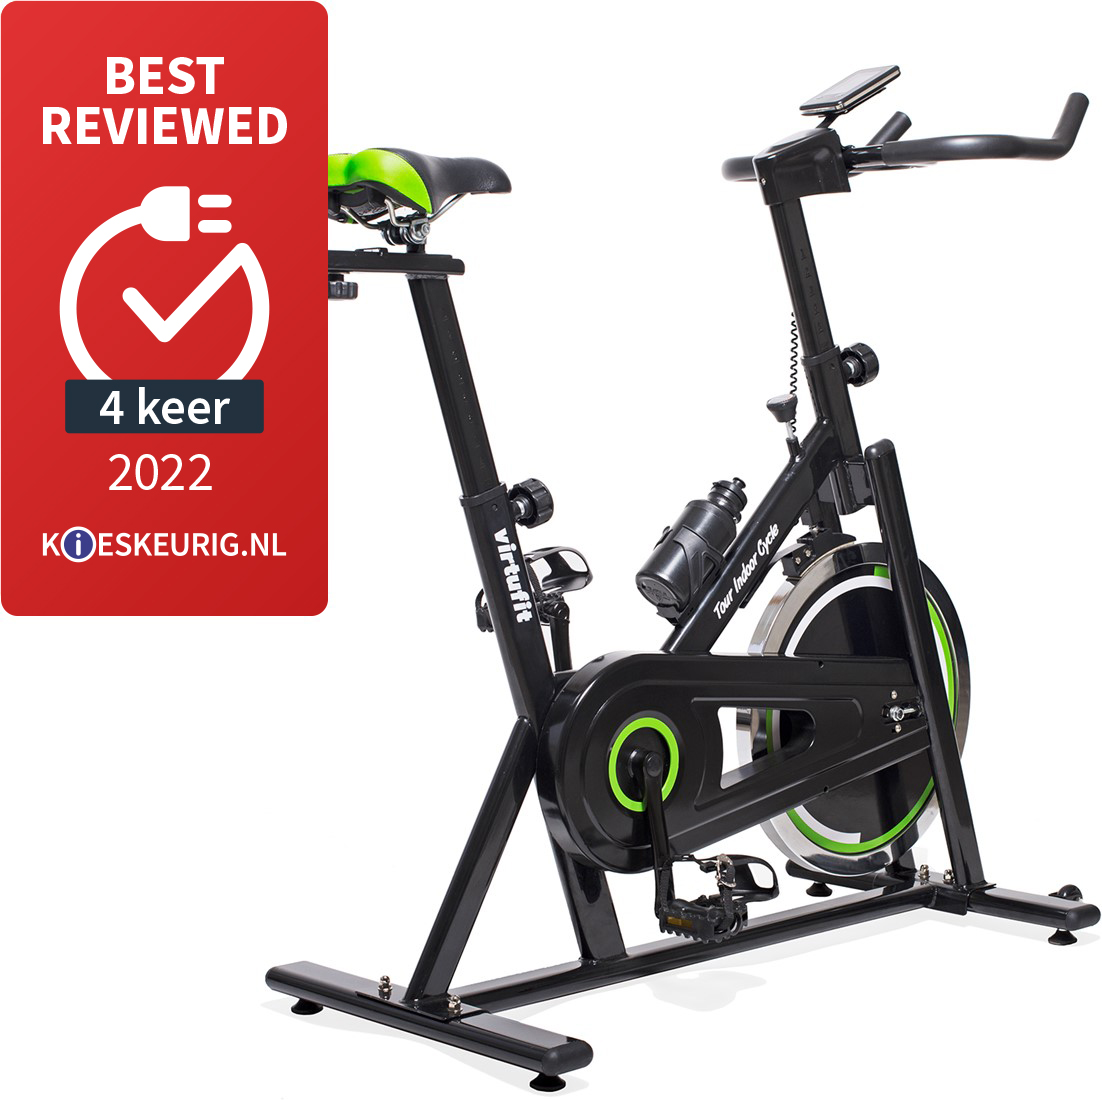 VirtuFit Cycle Spinningfiets - trainingsschema | Fitwinkel.nl